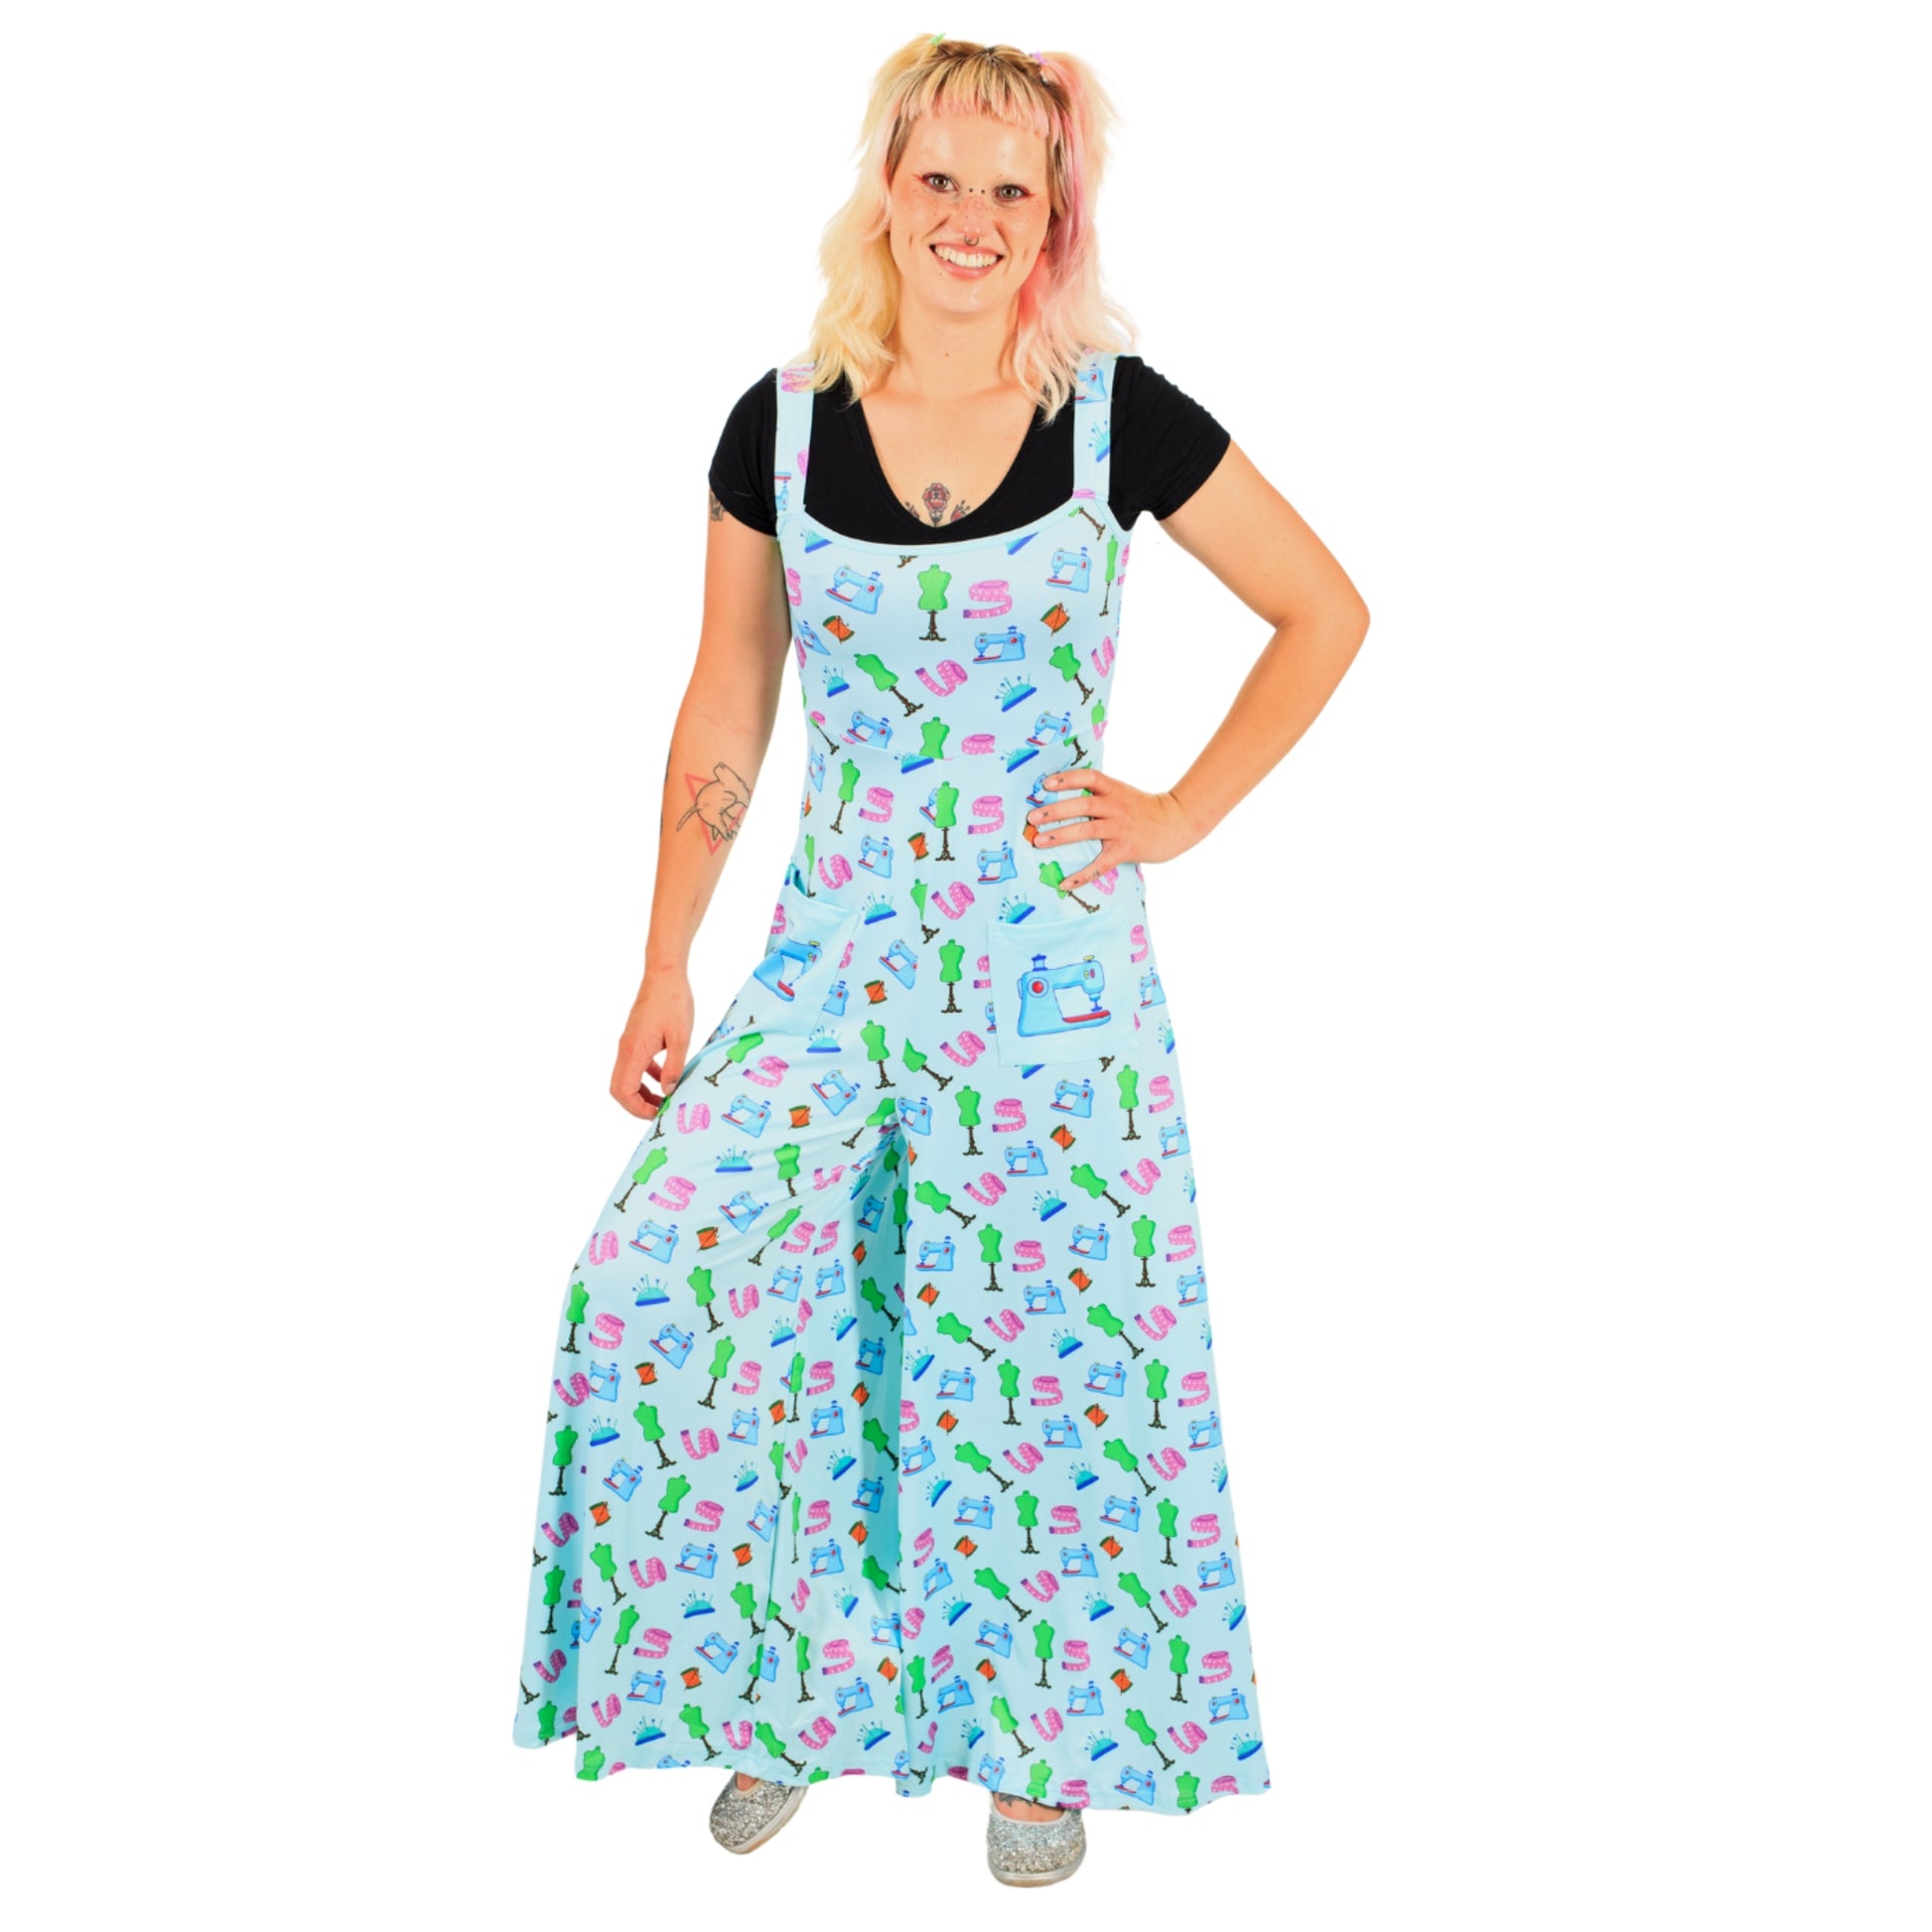 Haberdashery Jumpsuit by RainbowsAndFairies.com.au (Sewing - Dressmaking - Overalls - Wide Leg Pants - Kitsch - Rockabilly) - SKU: CL_JUMPS_HABER_ORG - Pic-02